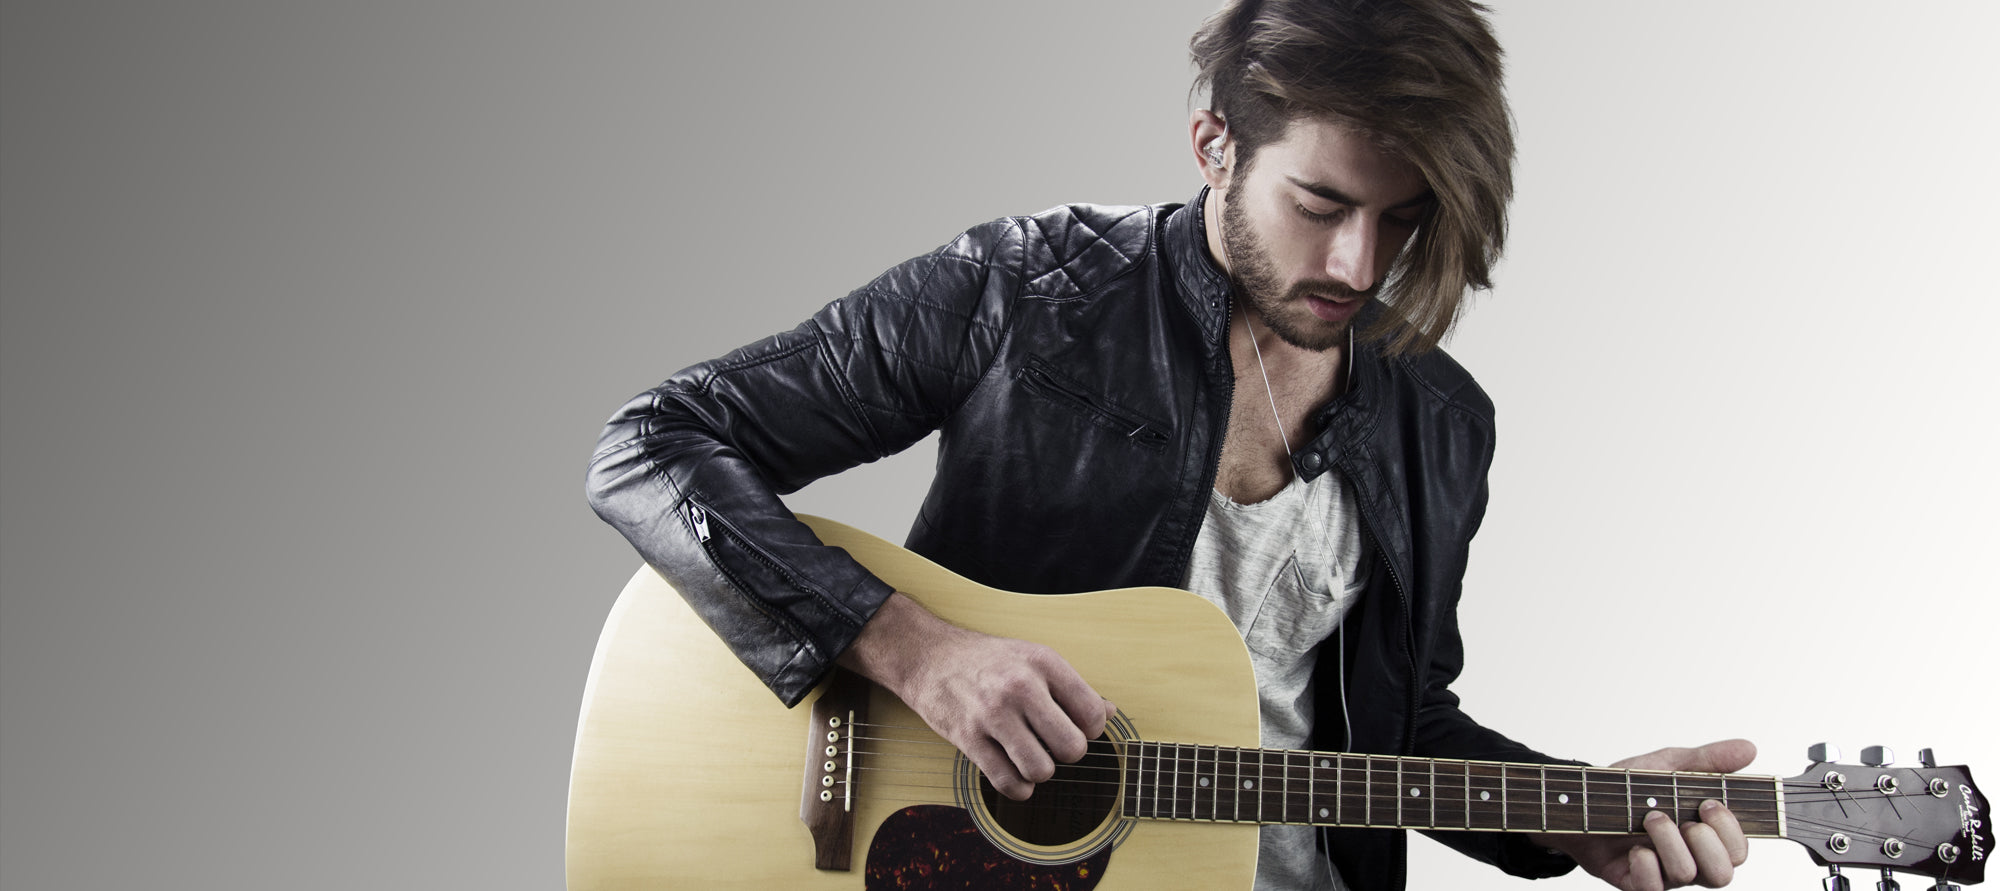 A stylish young man with a beard, wearing a leather jacket, plays an acoustic guitar against a light gray background.